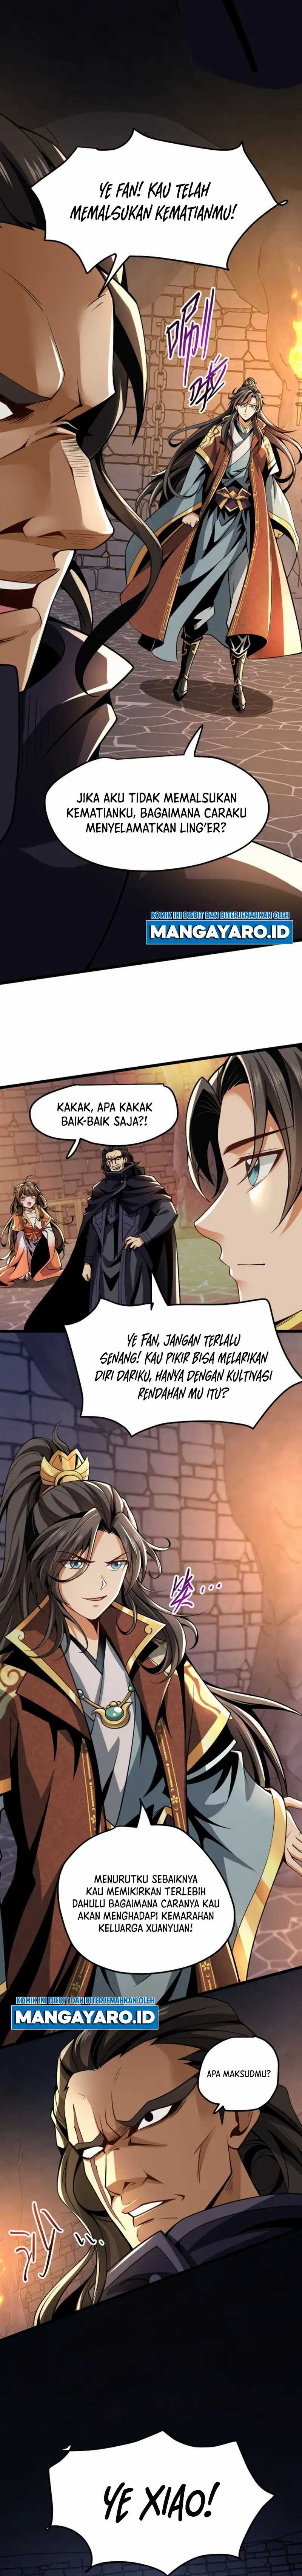 Demon Slaying For Eternity Chapter 07 - 89